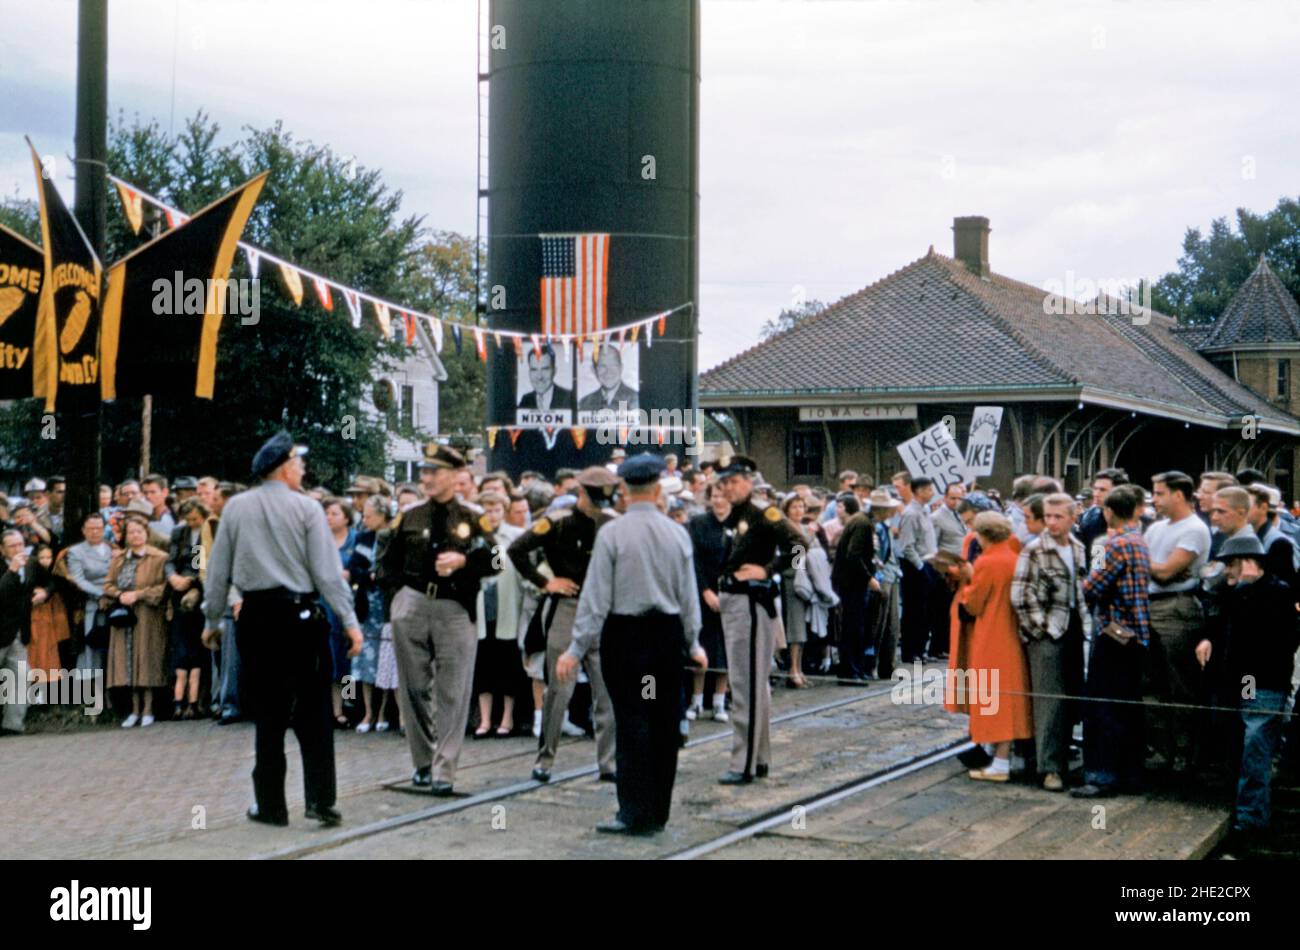 A crowd of supporters turn out on August 9th 1952 at the railroad station in Iowa City, Iowa, USA to await the arrival of Republican Dwight D Eisenhower on his campaign train in that year’s United States presidential election. Placards have slogans on them saying ‘Ike for us’ and ‘Welcome Ike’. Posters of Eisenhower and Richard Nixon, Eisenhower’s running mate, are on show.  Eisenhower won a landslide victory over Democrat Adlai Stevenson. This image is from an old American amateur Kodak colour transparency – a vintage 1950s photograph. Stock Photo